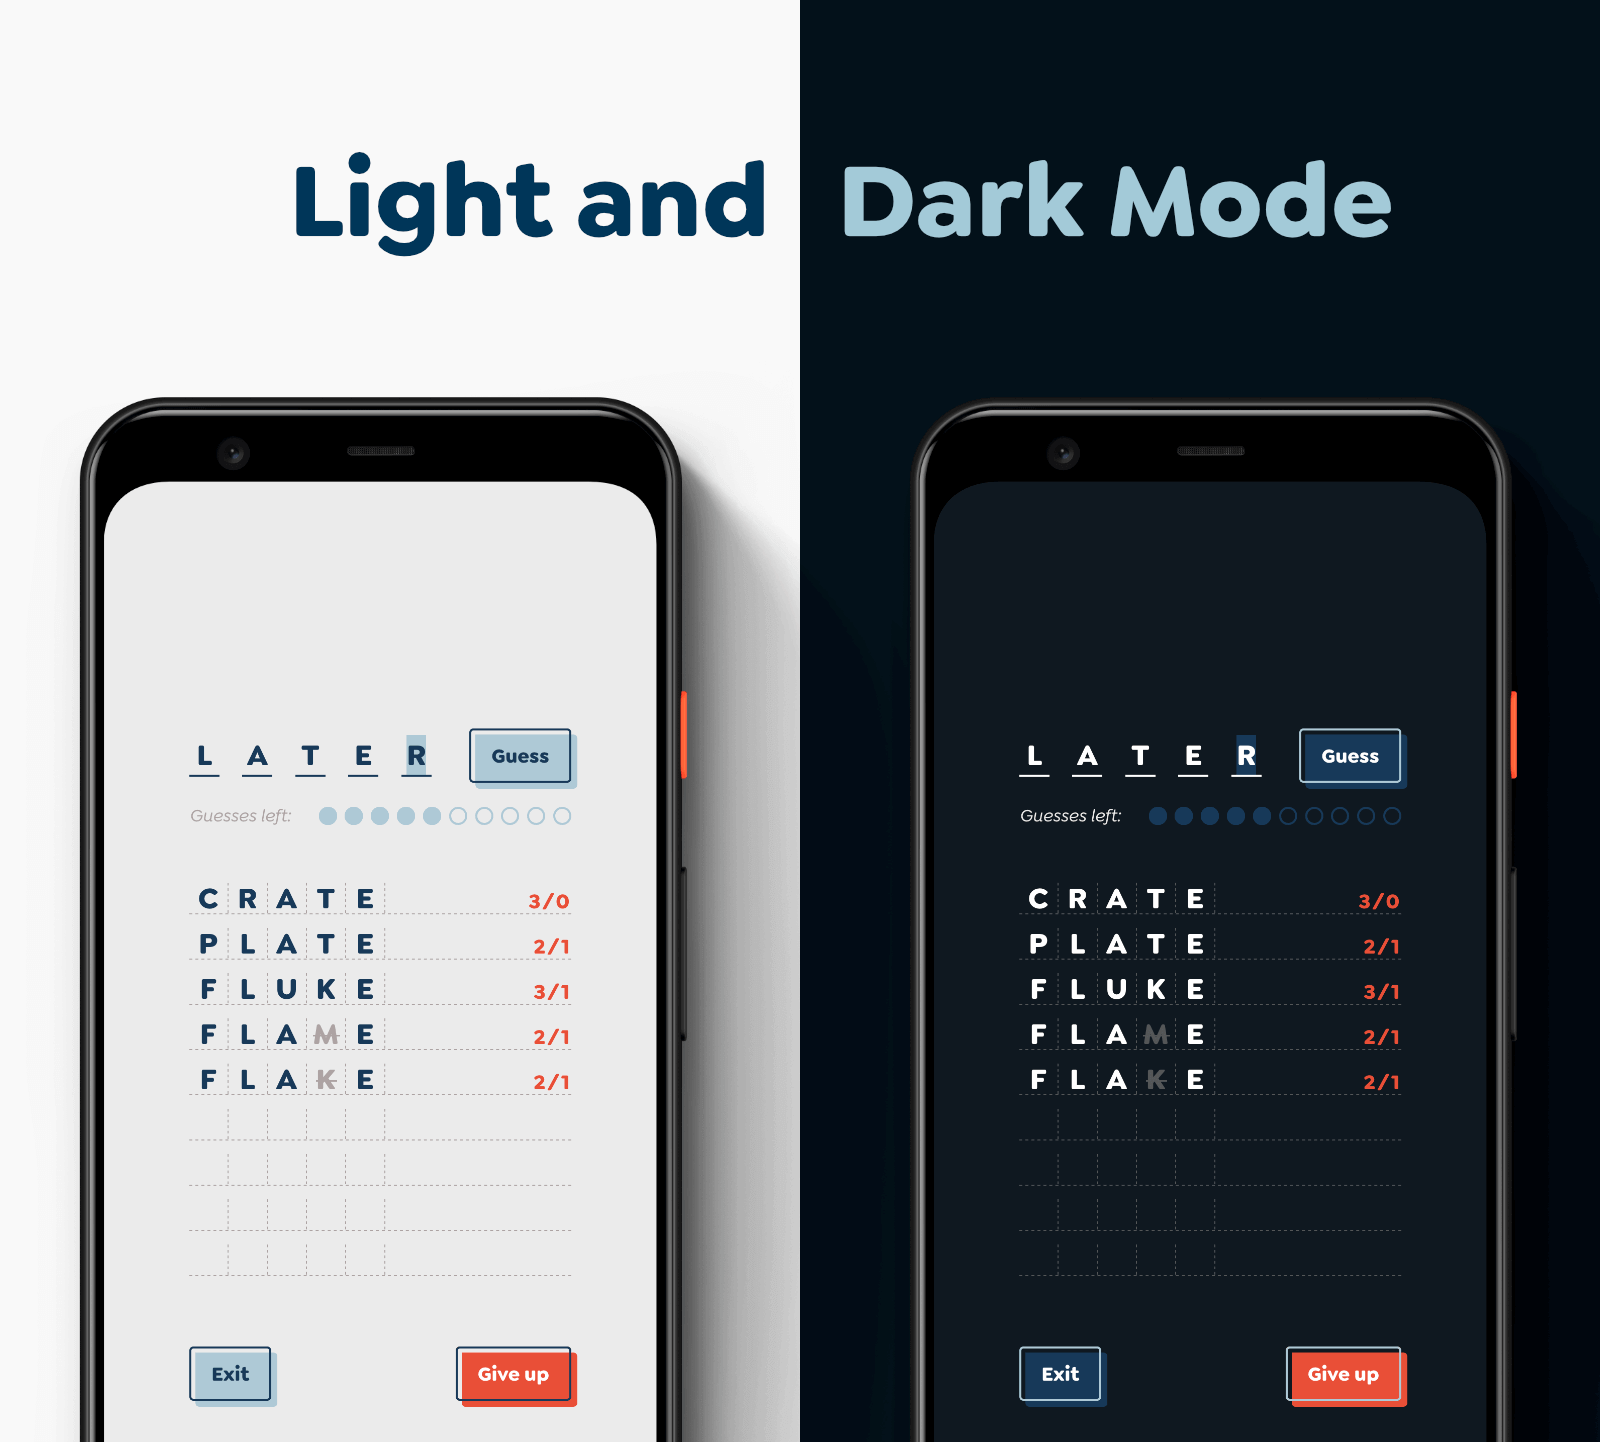 Quina features both light and dark mode.